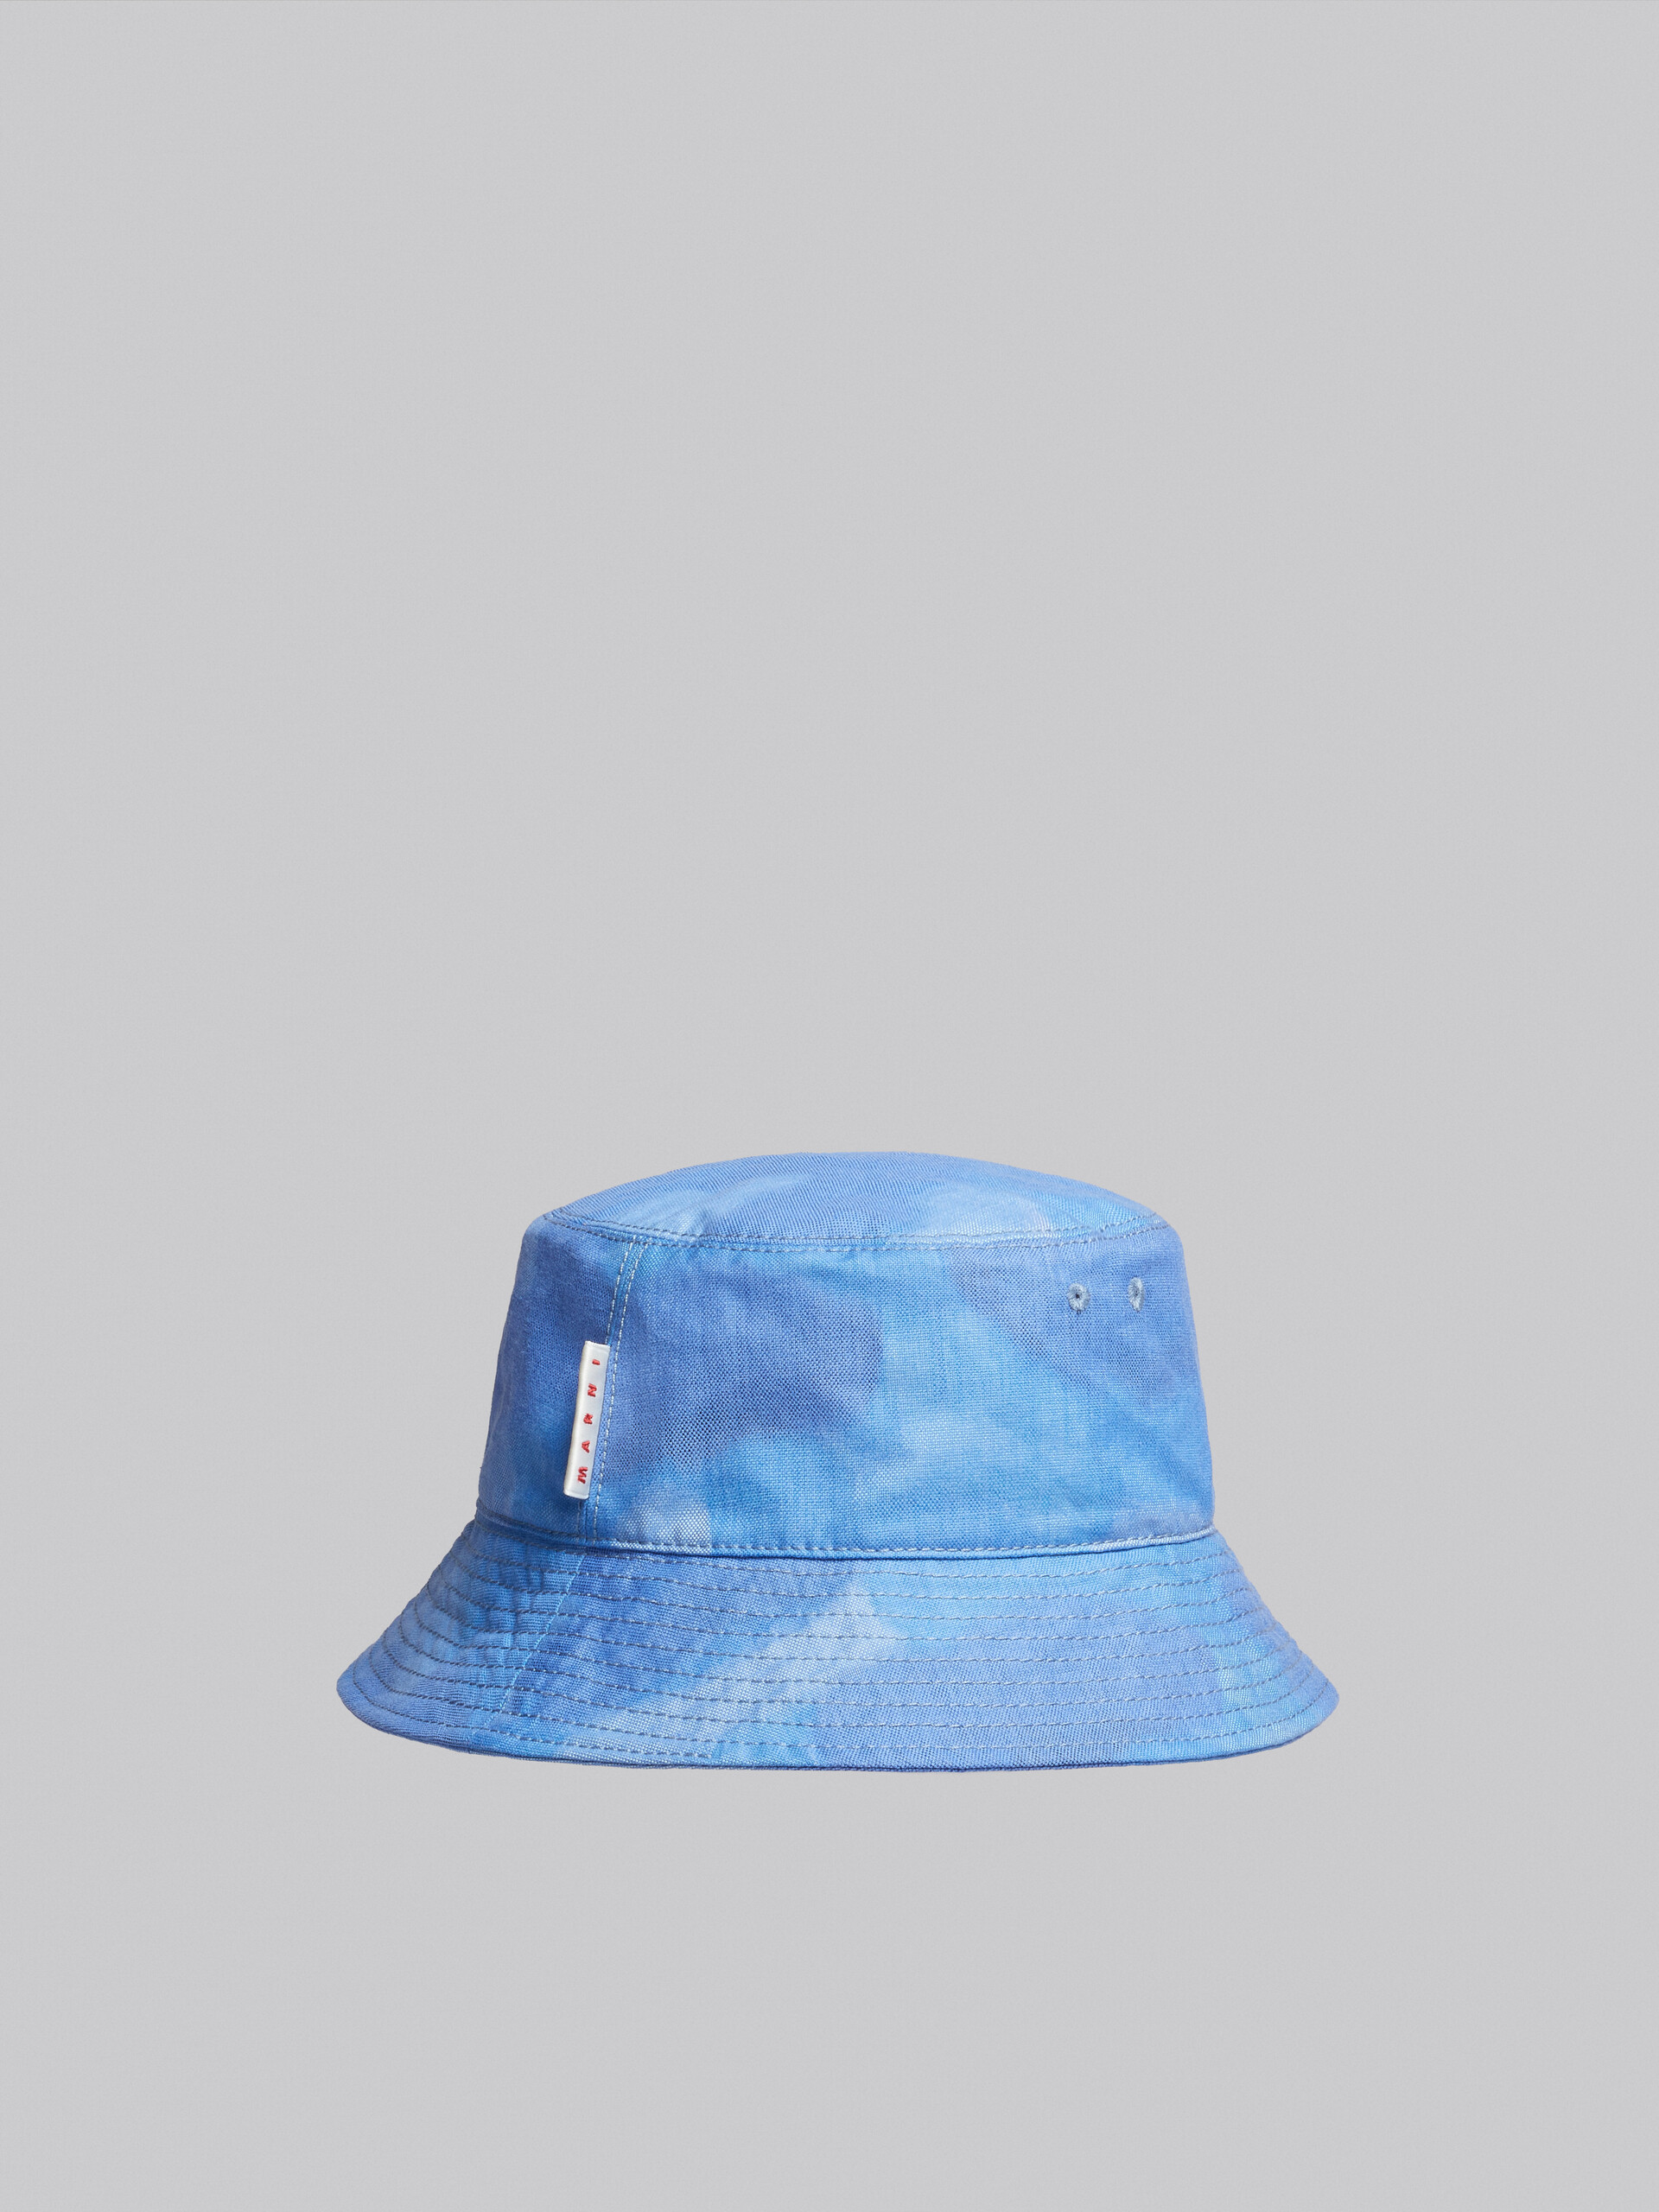 Bucket hat in canvas with light blue Clouds motif - Hats - Image 3